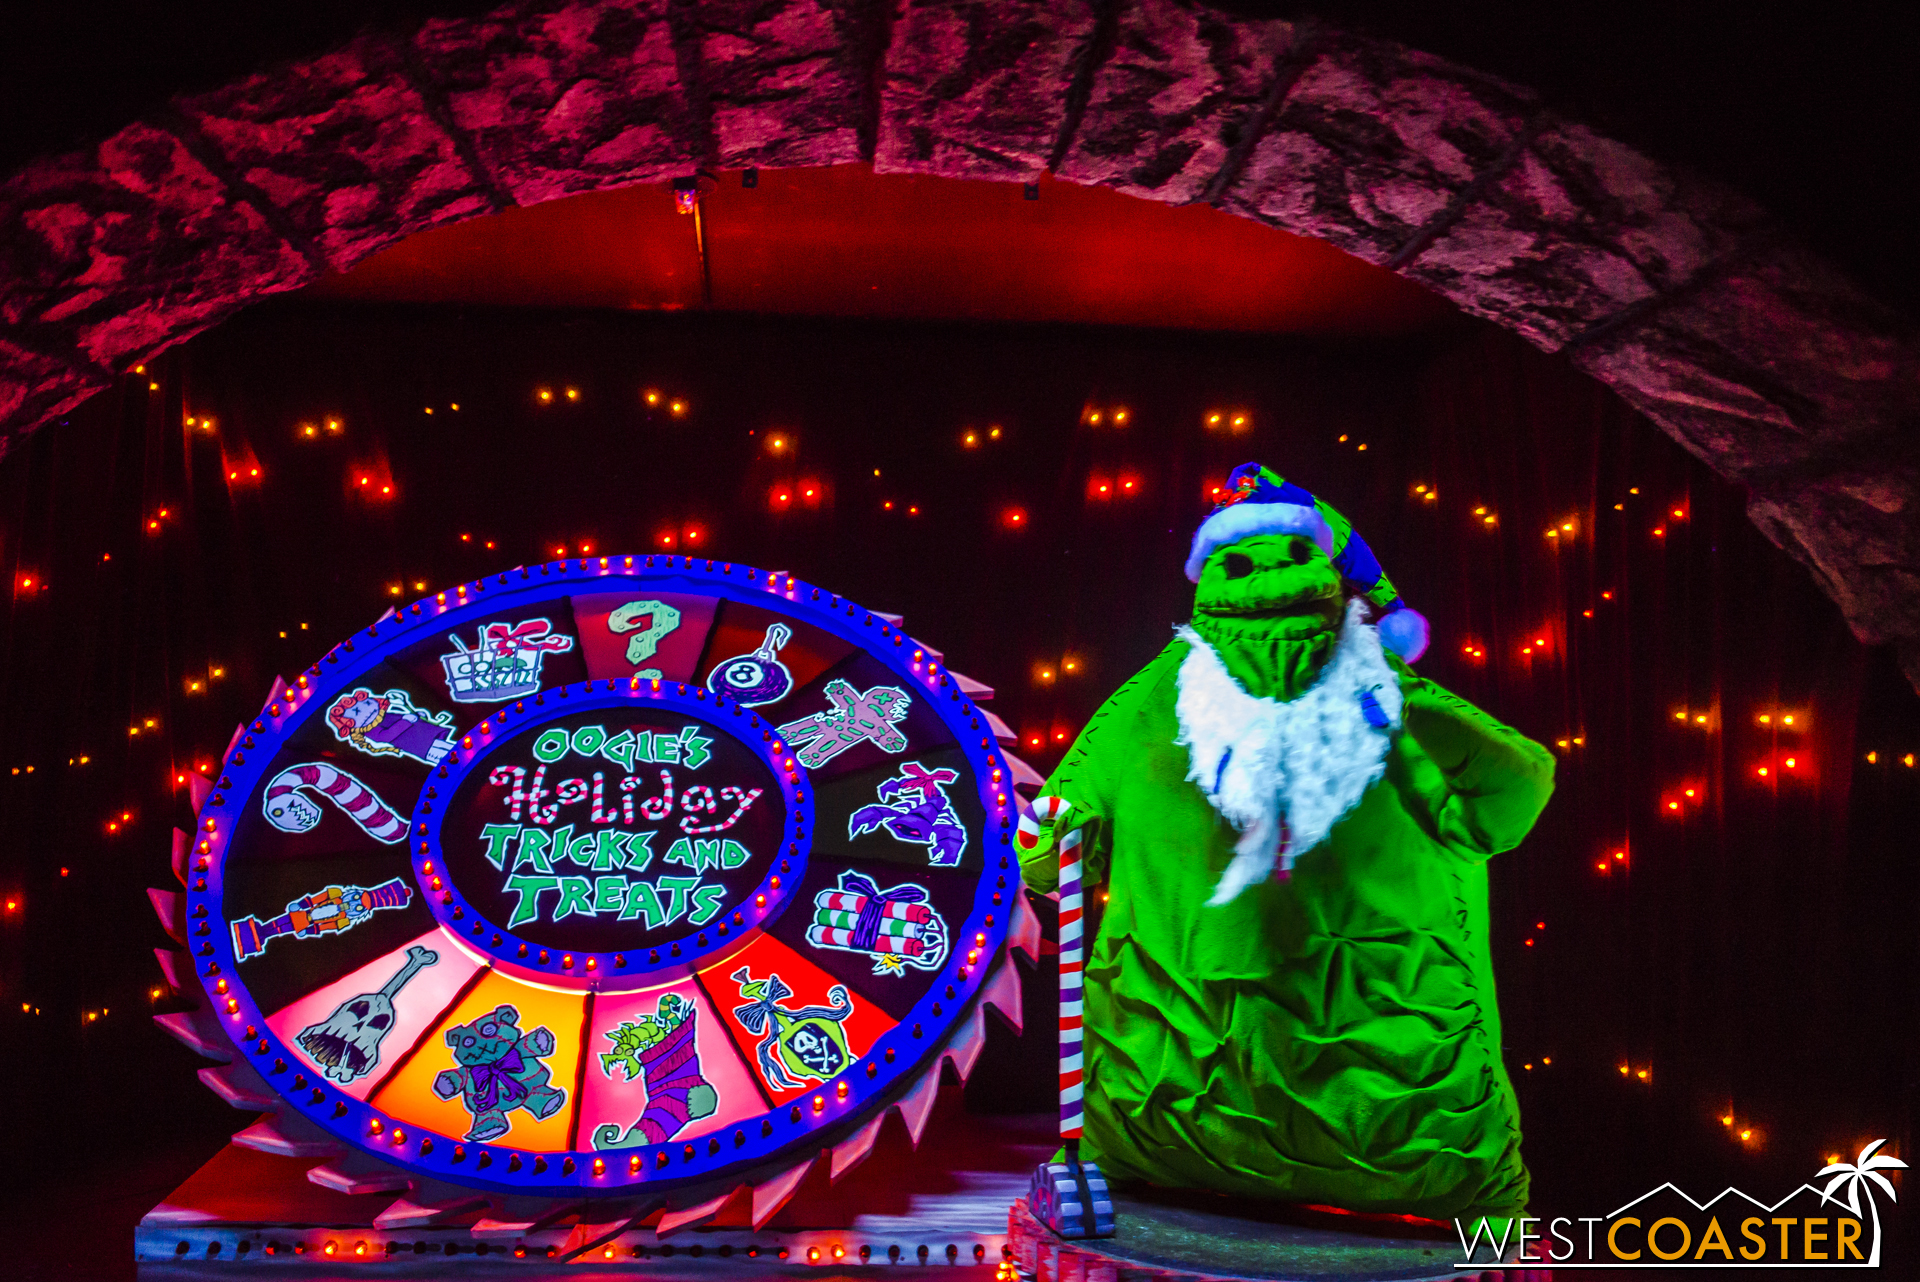  Just watch out for Oogie Boogie's tricks as you conclude the tour. 